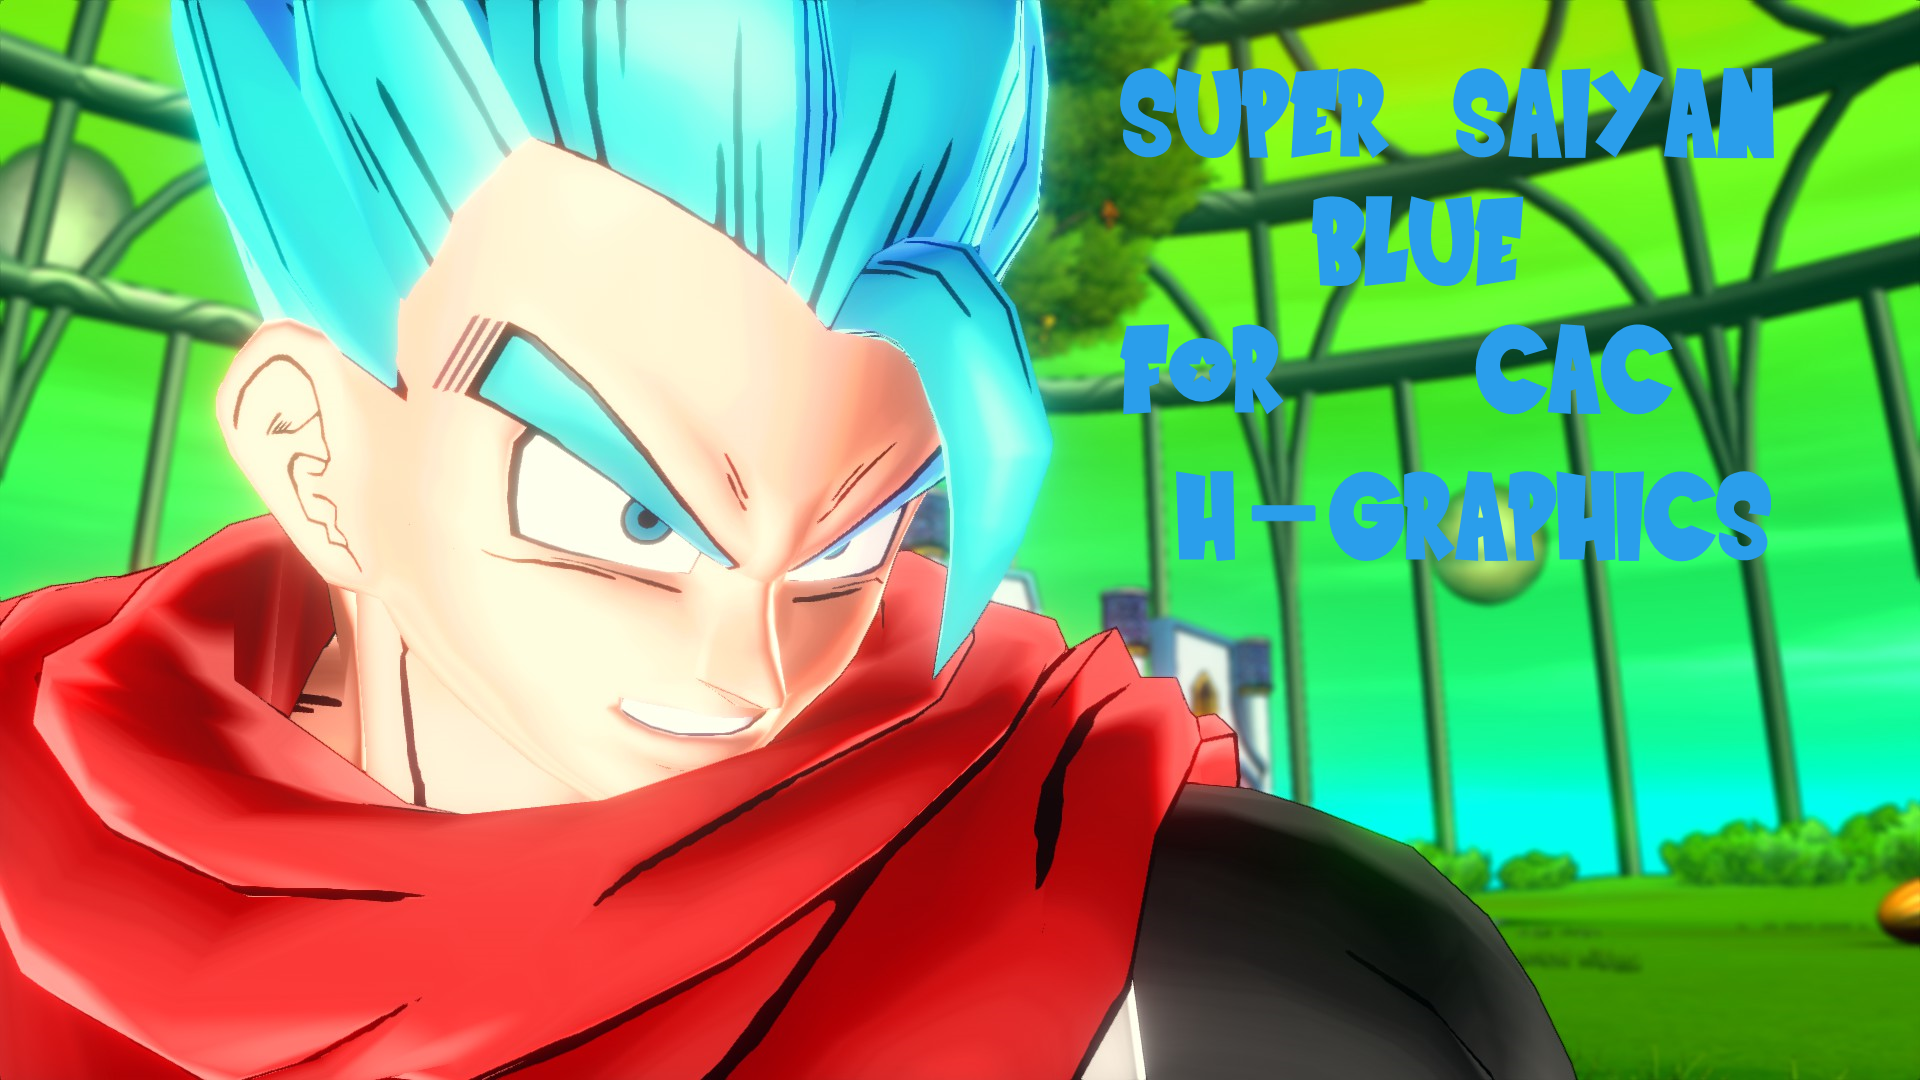 Super Saiyan Blue/Super Saiyan God Super Saiyan for Cac! Version 2.0: H-Graphics!